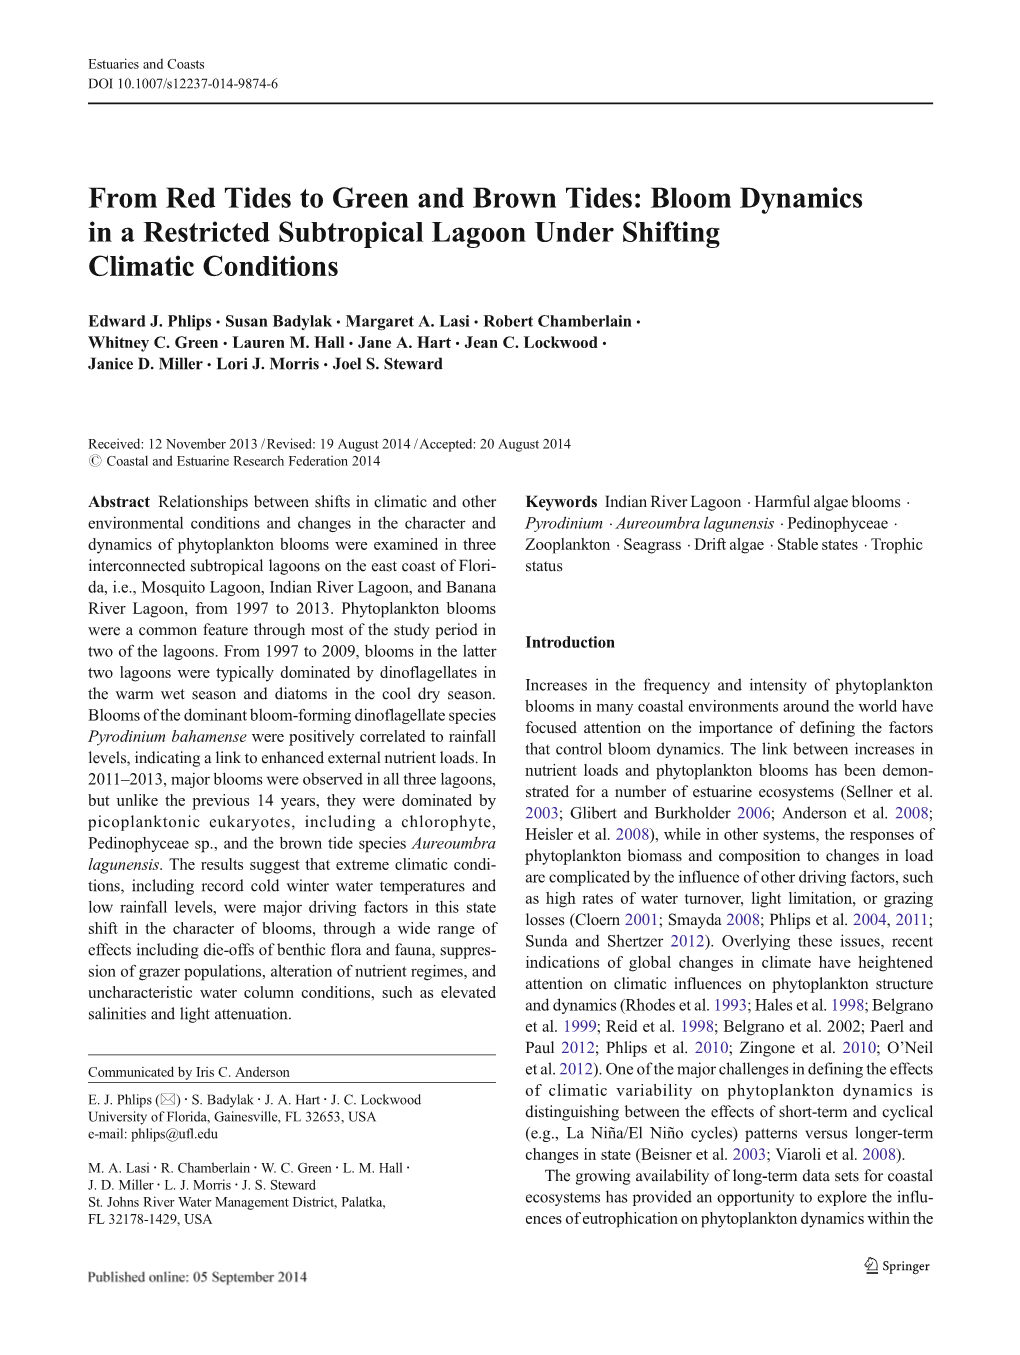 From Red Tides to Green and Brown Tides: Bloom Dynamics in a Restricted Subtropical Lagoon Under Shifting Climatic Conditions